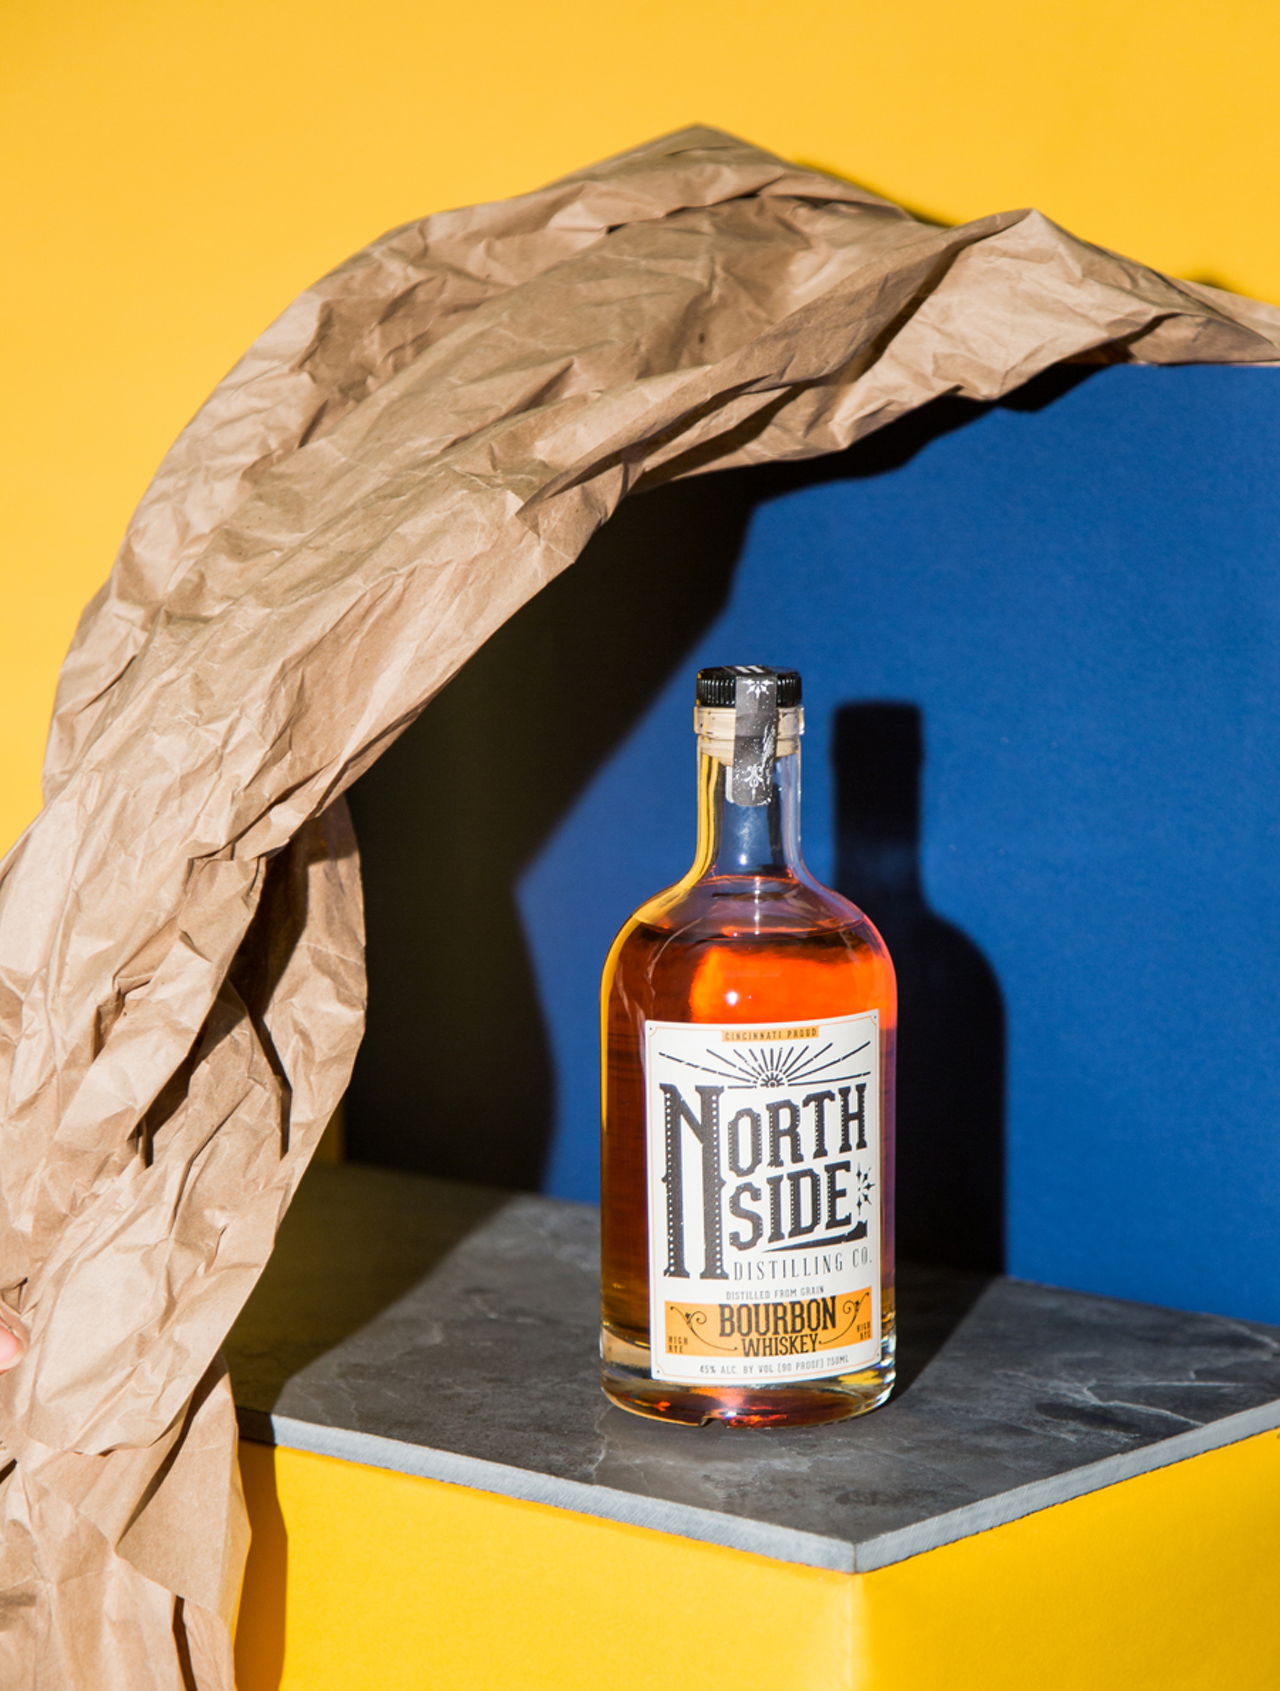 In early November, Northside Distilling Co. released a limited 500-bottle run of its debut white label bourbon whiskey ($39.99). Already well known for its award-winning corn-based vodka, this first batch of bourbon was aged for about two years in the company’s Northside rickhouse (a 100-year-old former horse barn) in small, charred-oak barrels to produce a faster maturation of the spirit. This high-rye blend has a soft, rounded taste with a spicy, nutty finish, says master distiller Chris Courts, and is reportedly one of the first whiskeys distilled and barreled in downtown Cincinnati since Prohibition. Visit the distillery’s tasting room for drinks and tours and stay tuned for a single barrel black label bourbon release early next year. 922 Race St., Downtown or find stockists and local bars that serve Northside at northsidedistilling.com.